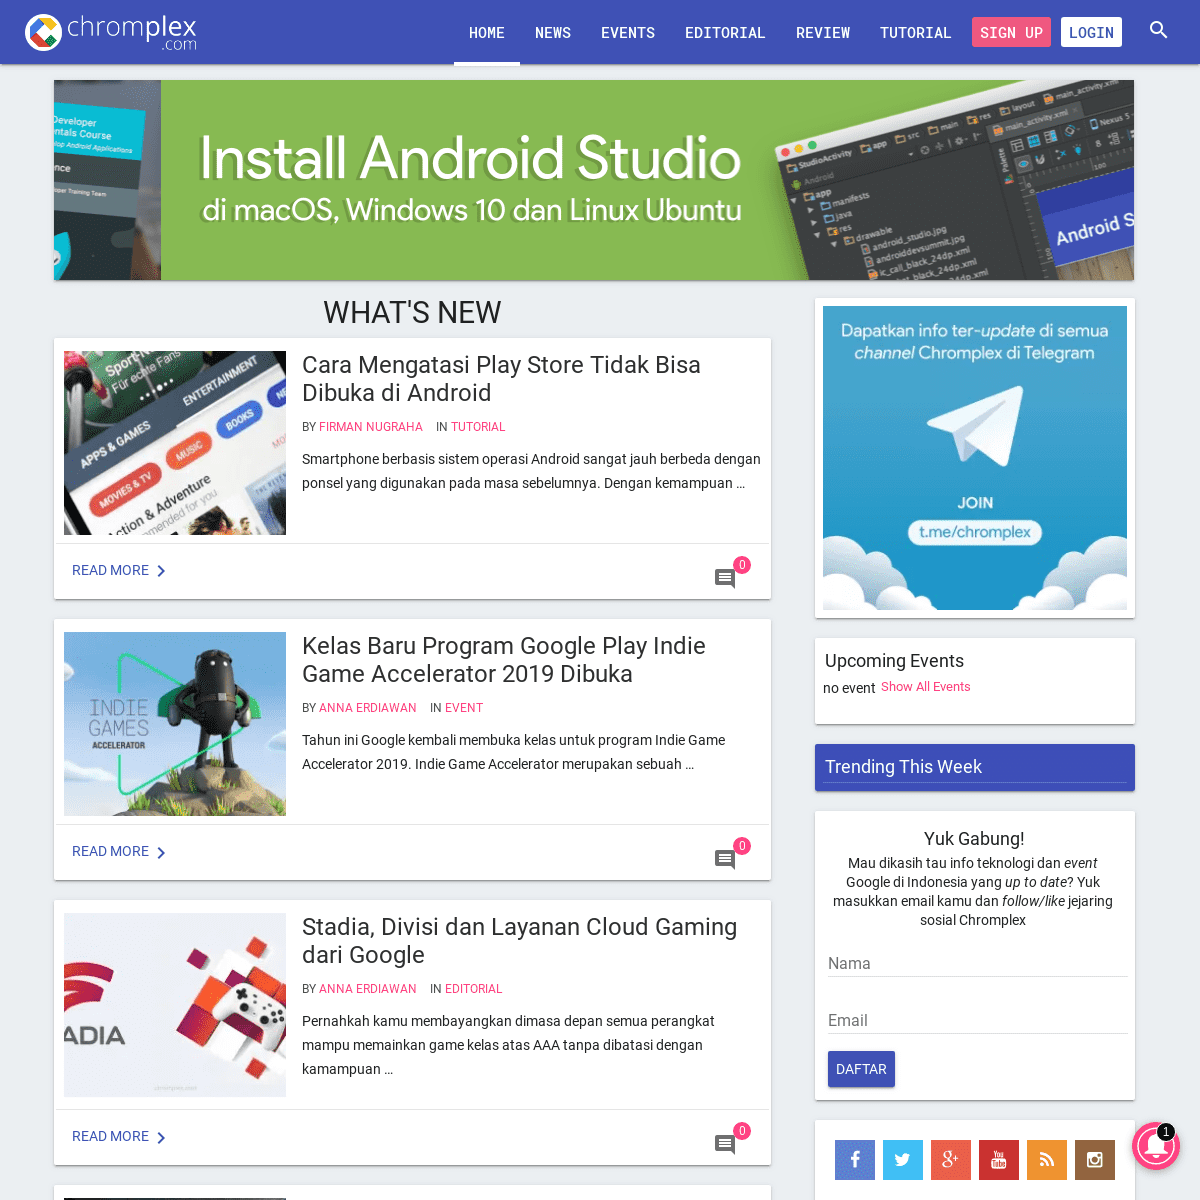 Chromplex - Indonesian First and Trusted Tech Media about Google